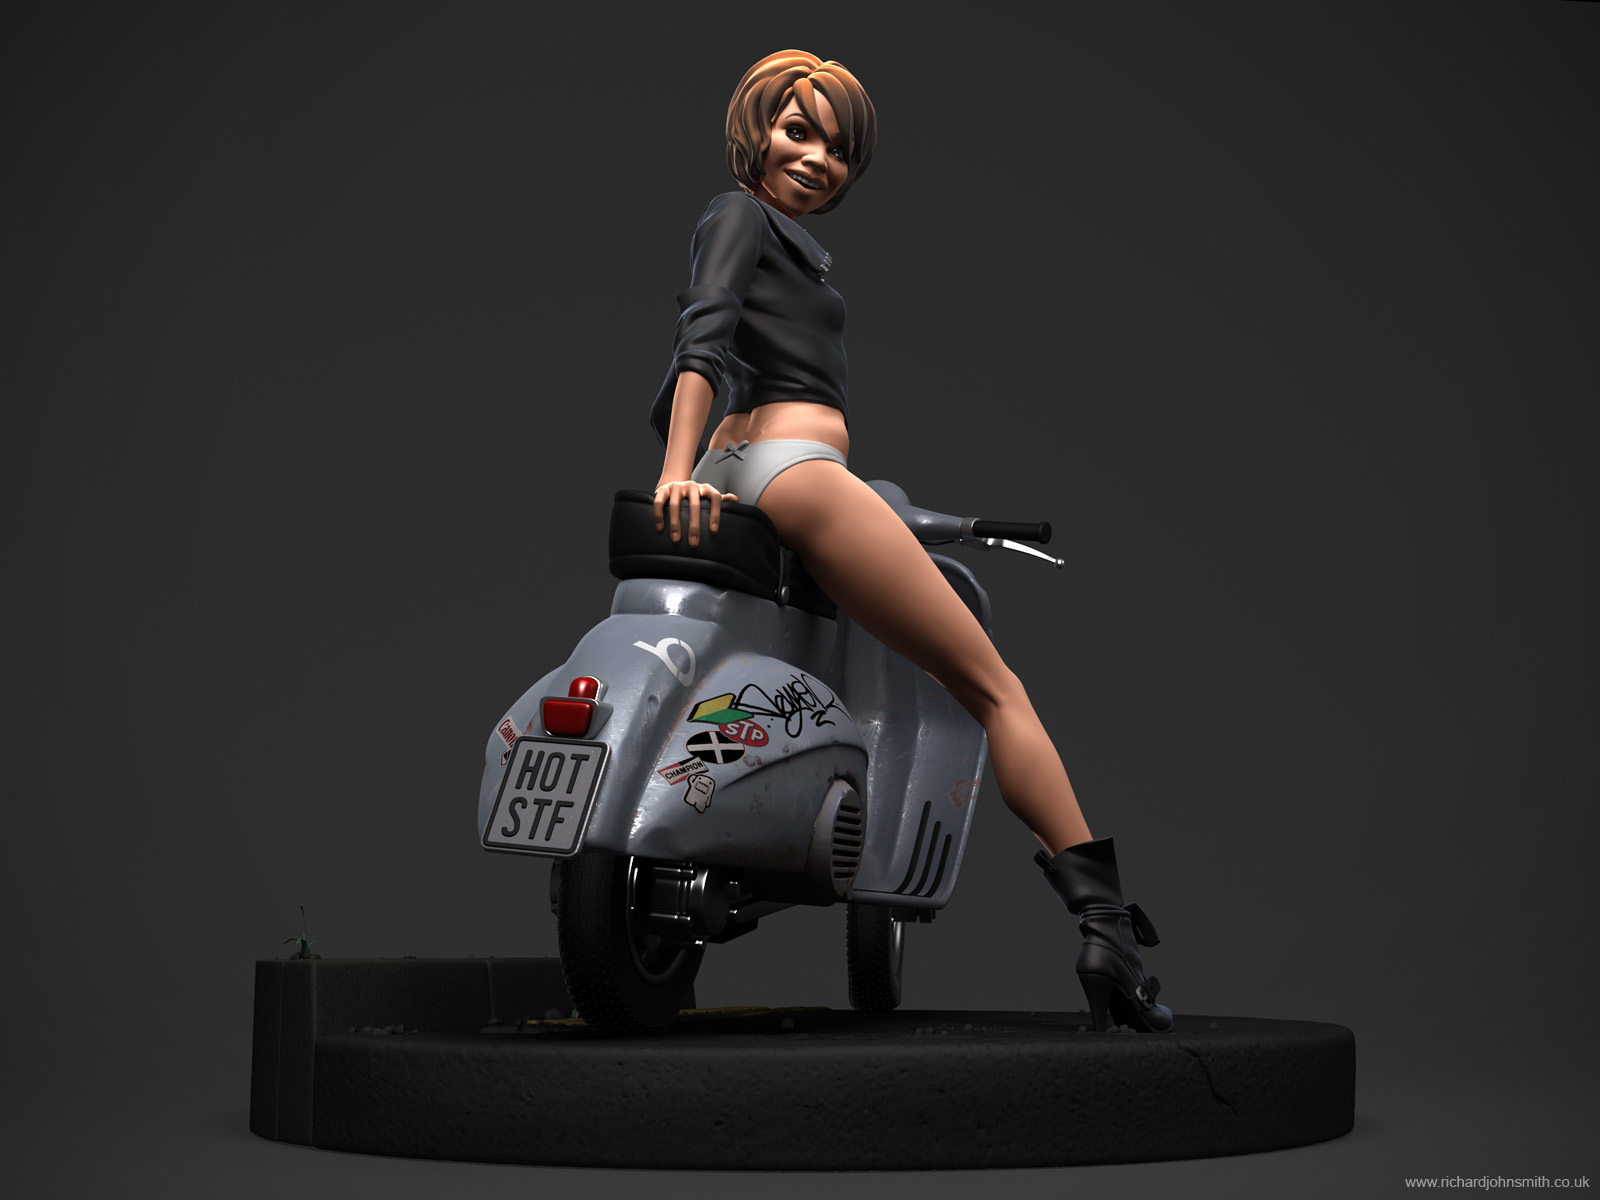 Hot Stuff! - Scooter Girl Pin Up - ZBrushCentral